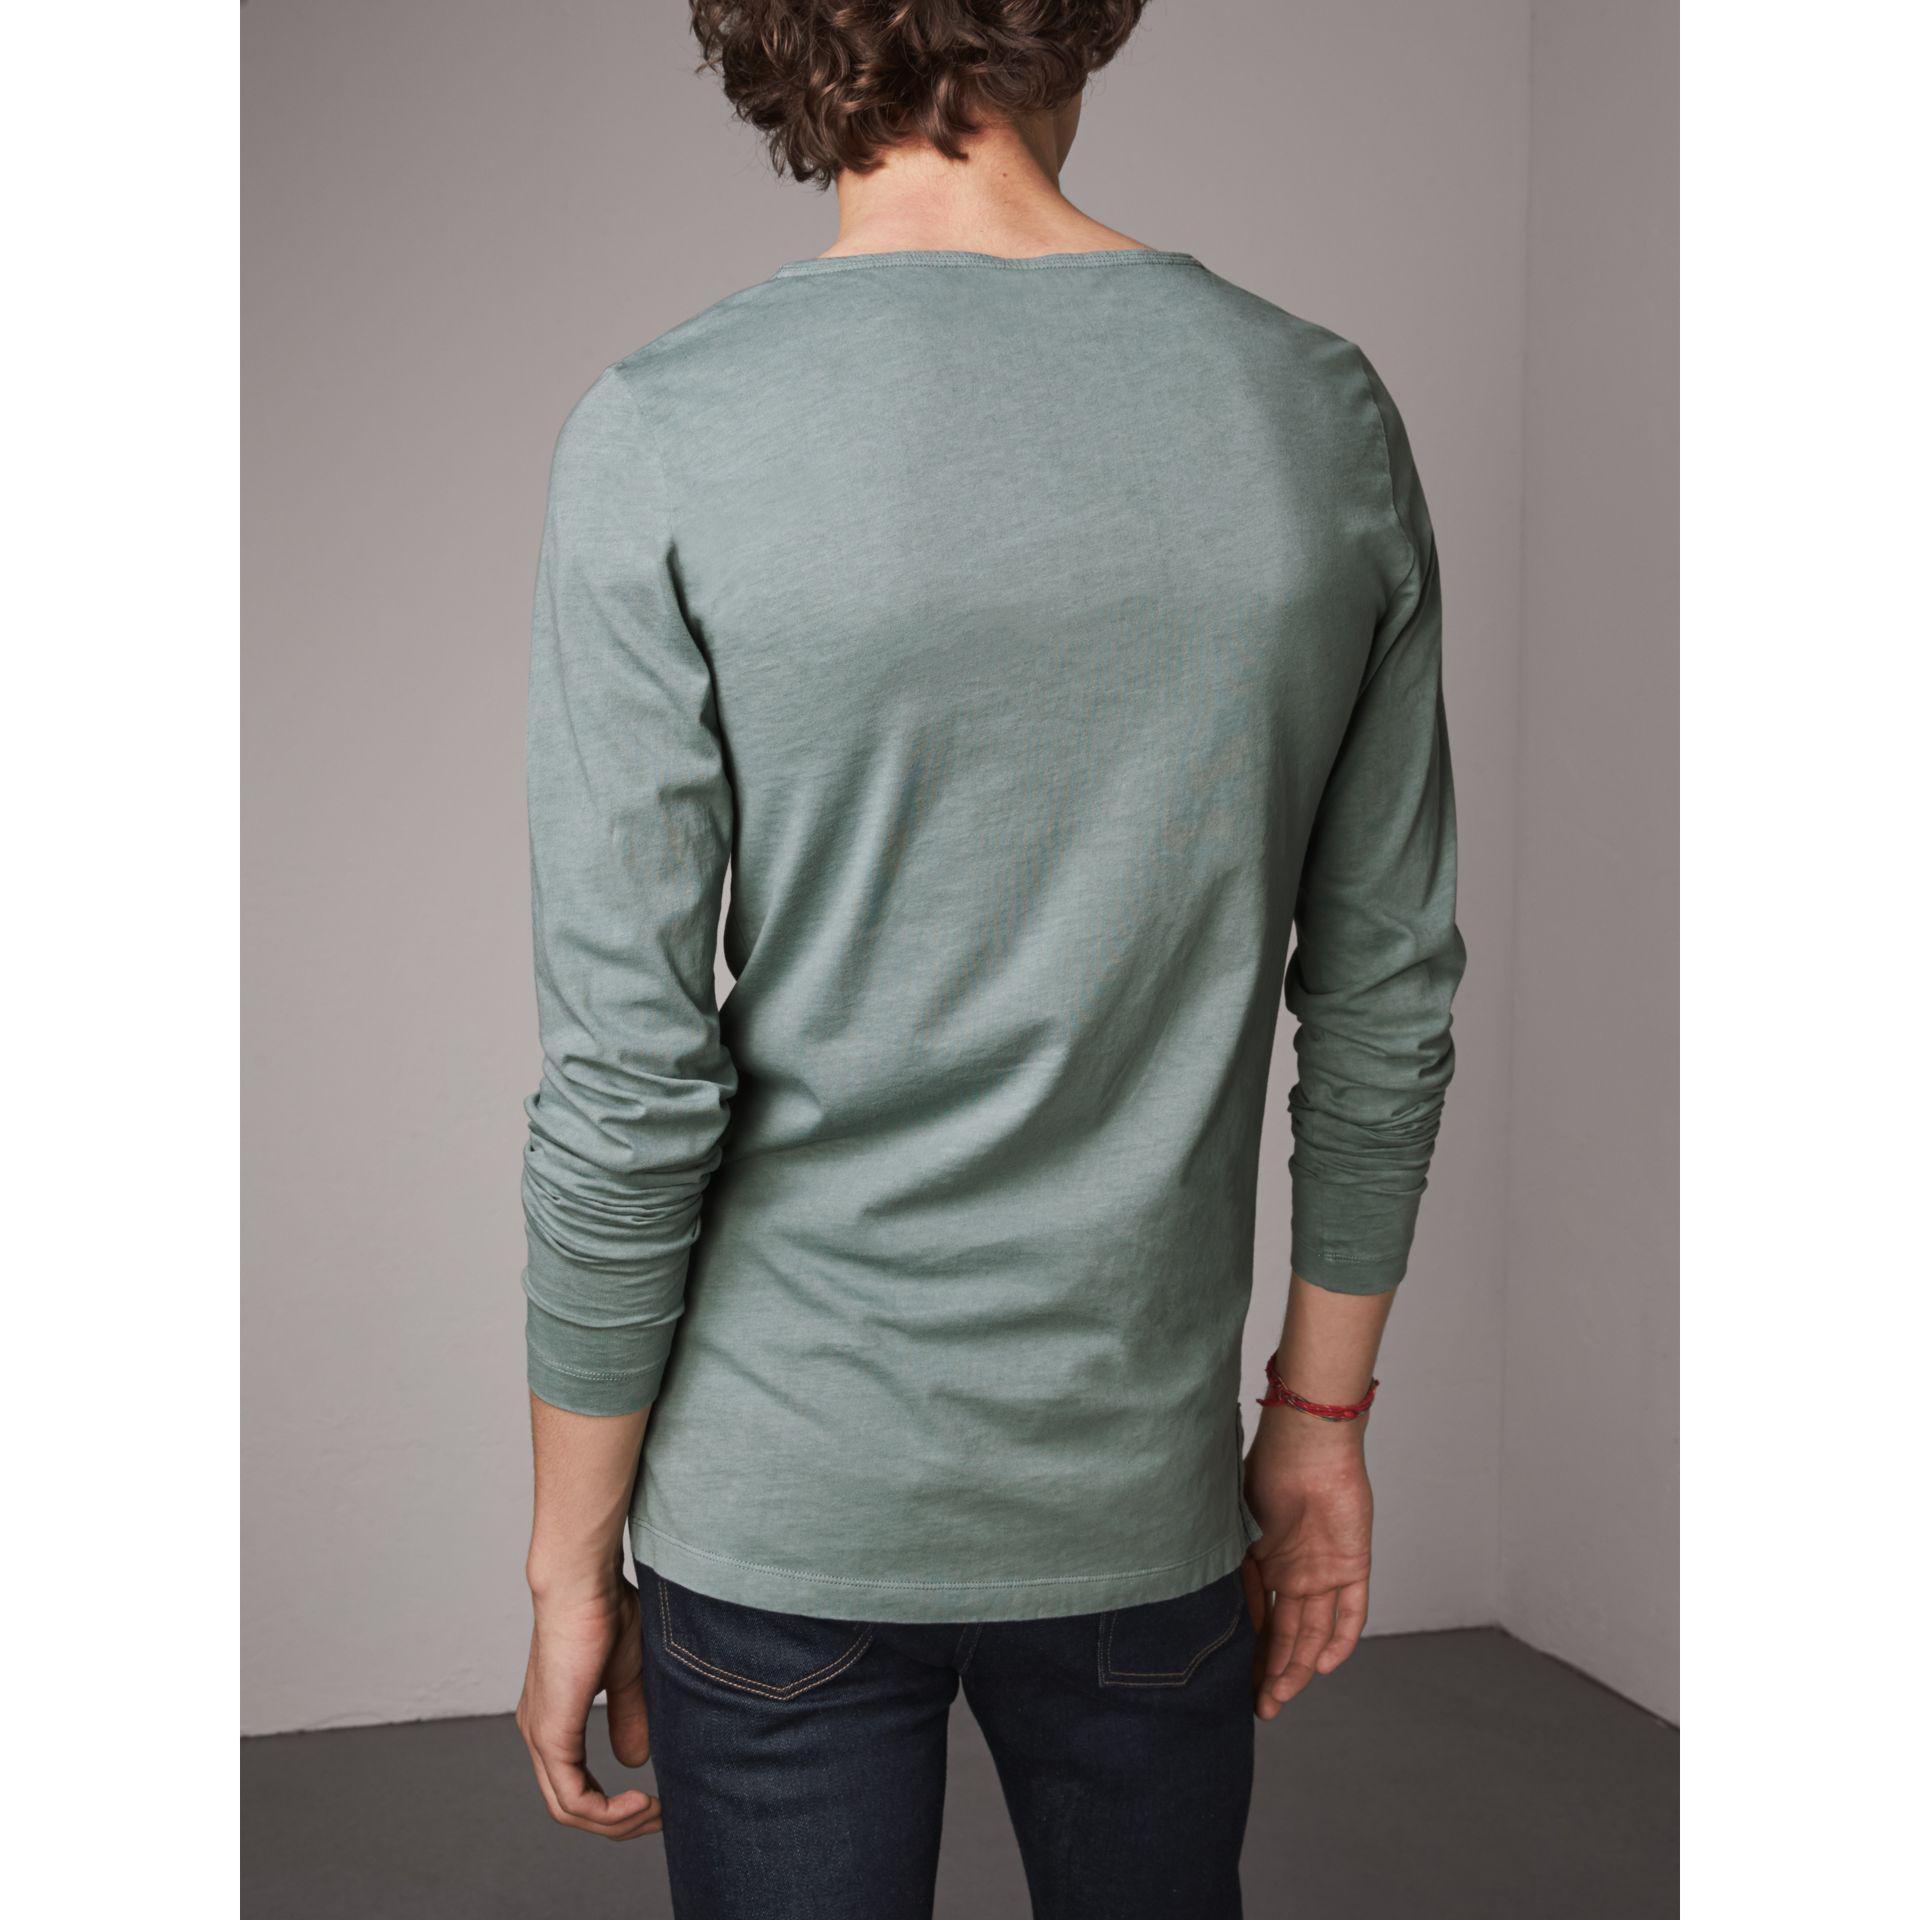 Burberry Long-sleeve Embroidered Cotton Top for Men - Lyst